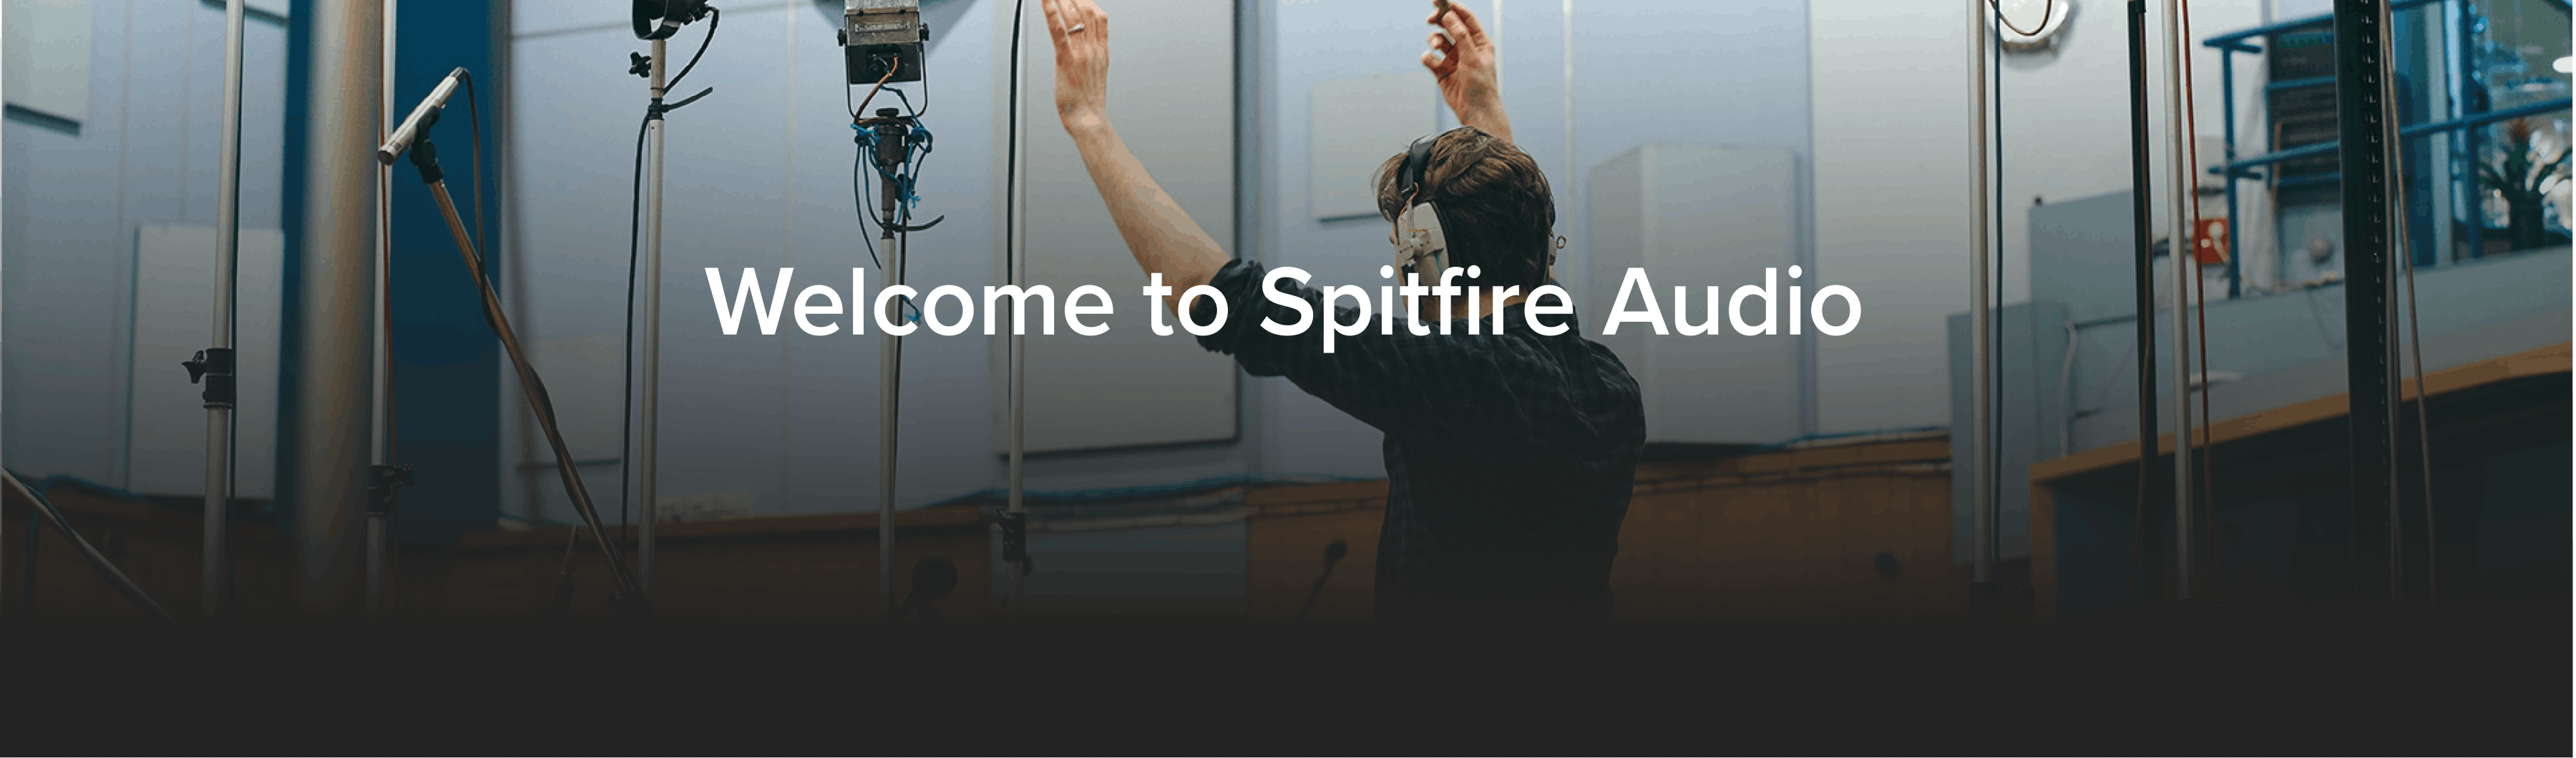 Welcome to Spitfire Audio